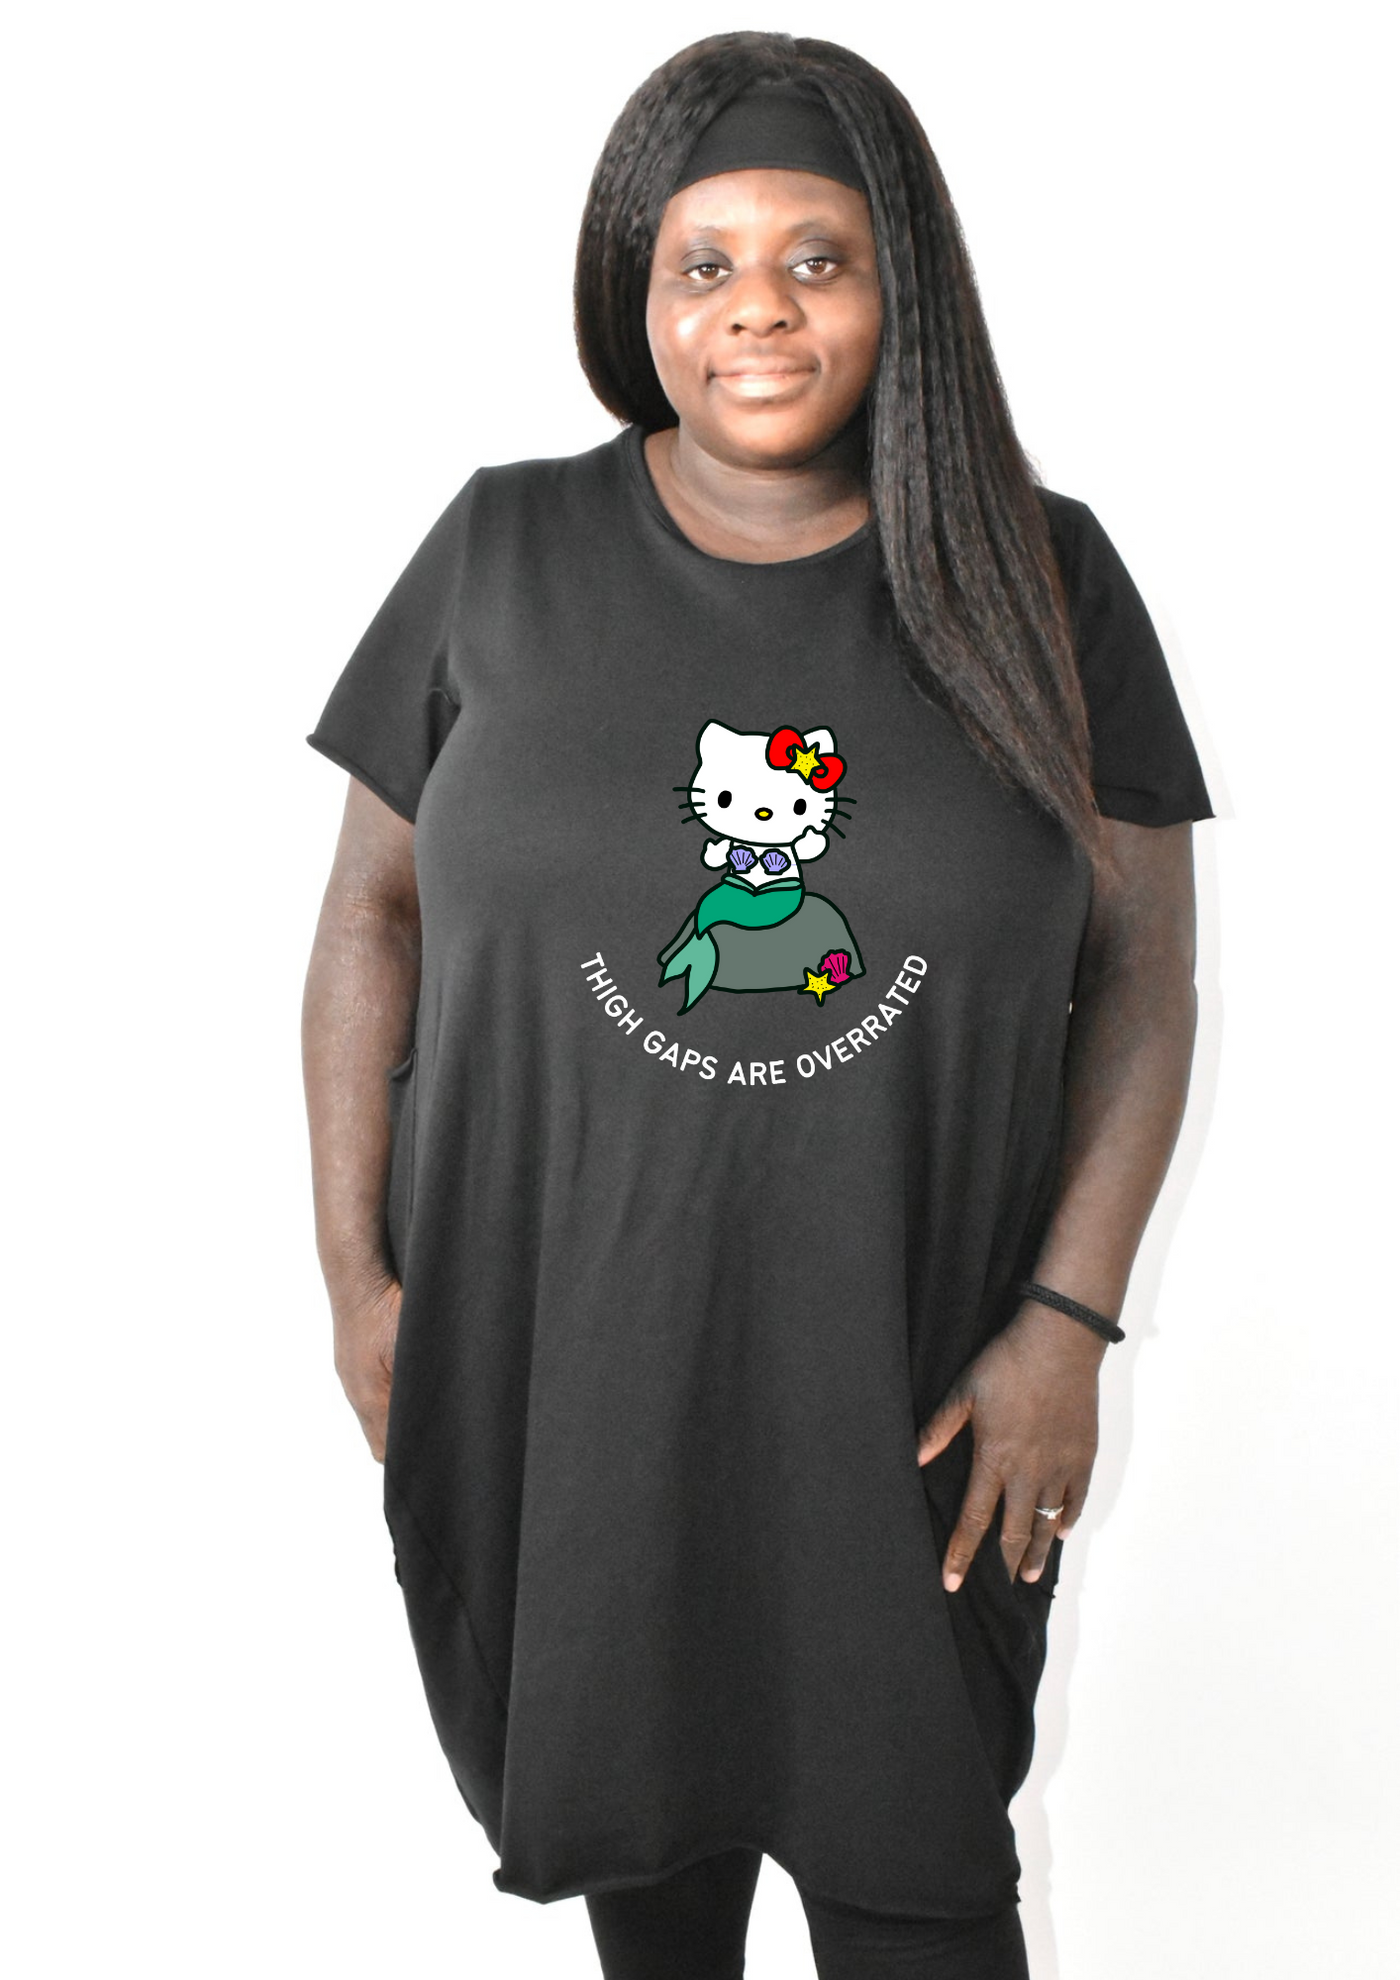 Black “Thigh Gaps Are Overrated” Kitty T-shirt Dress